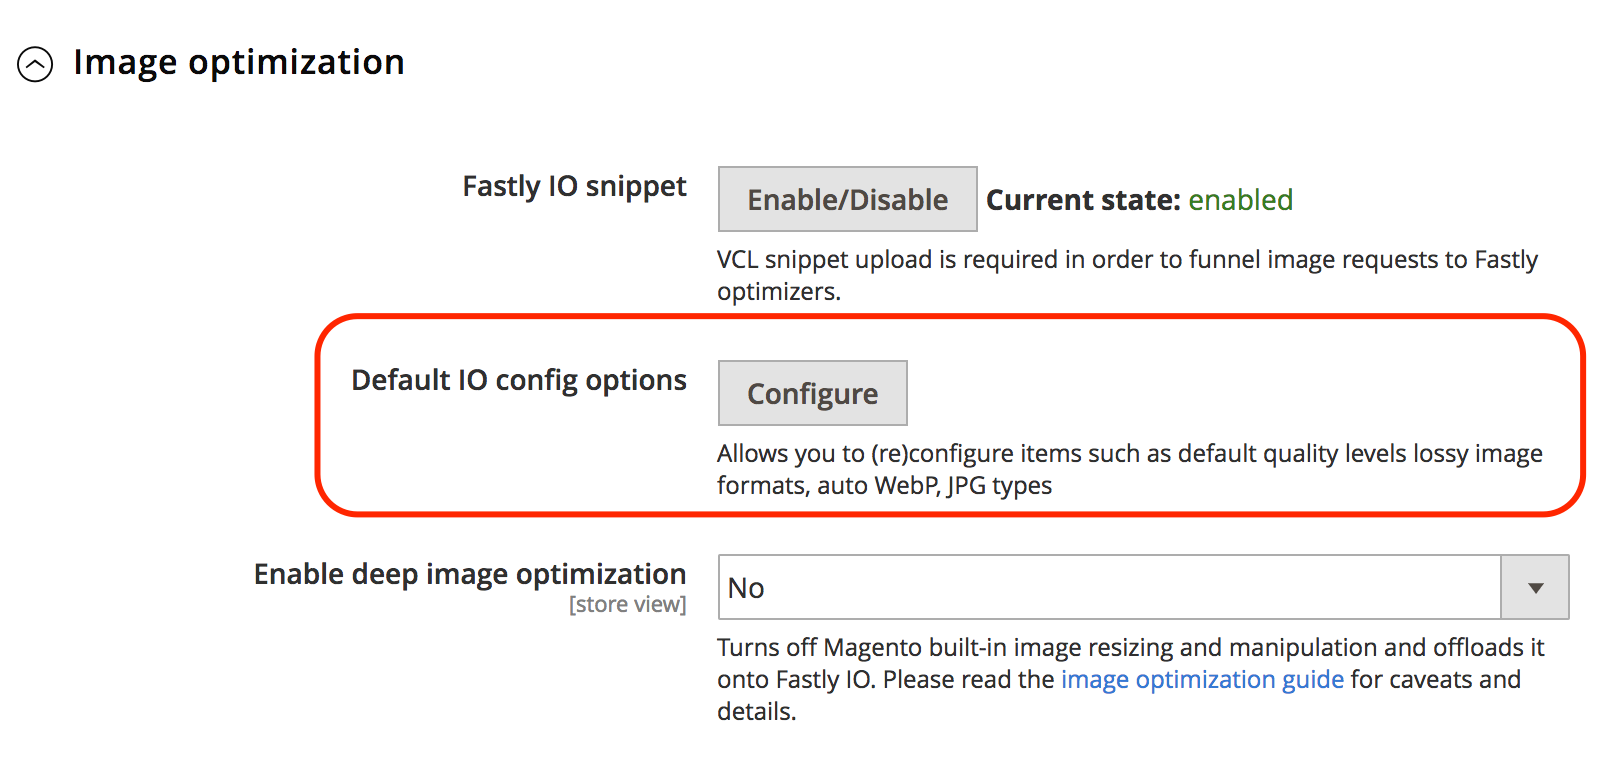 View the Fastly IO configuration settings